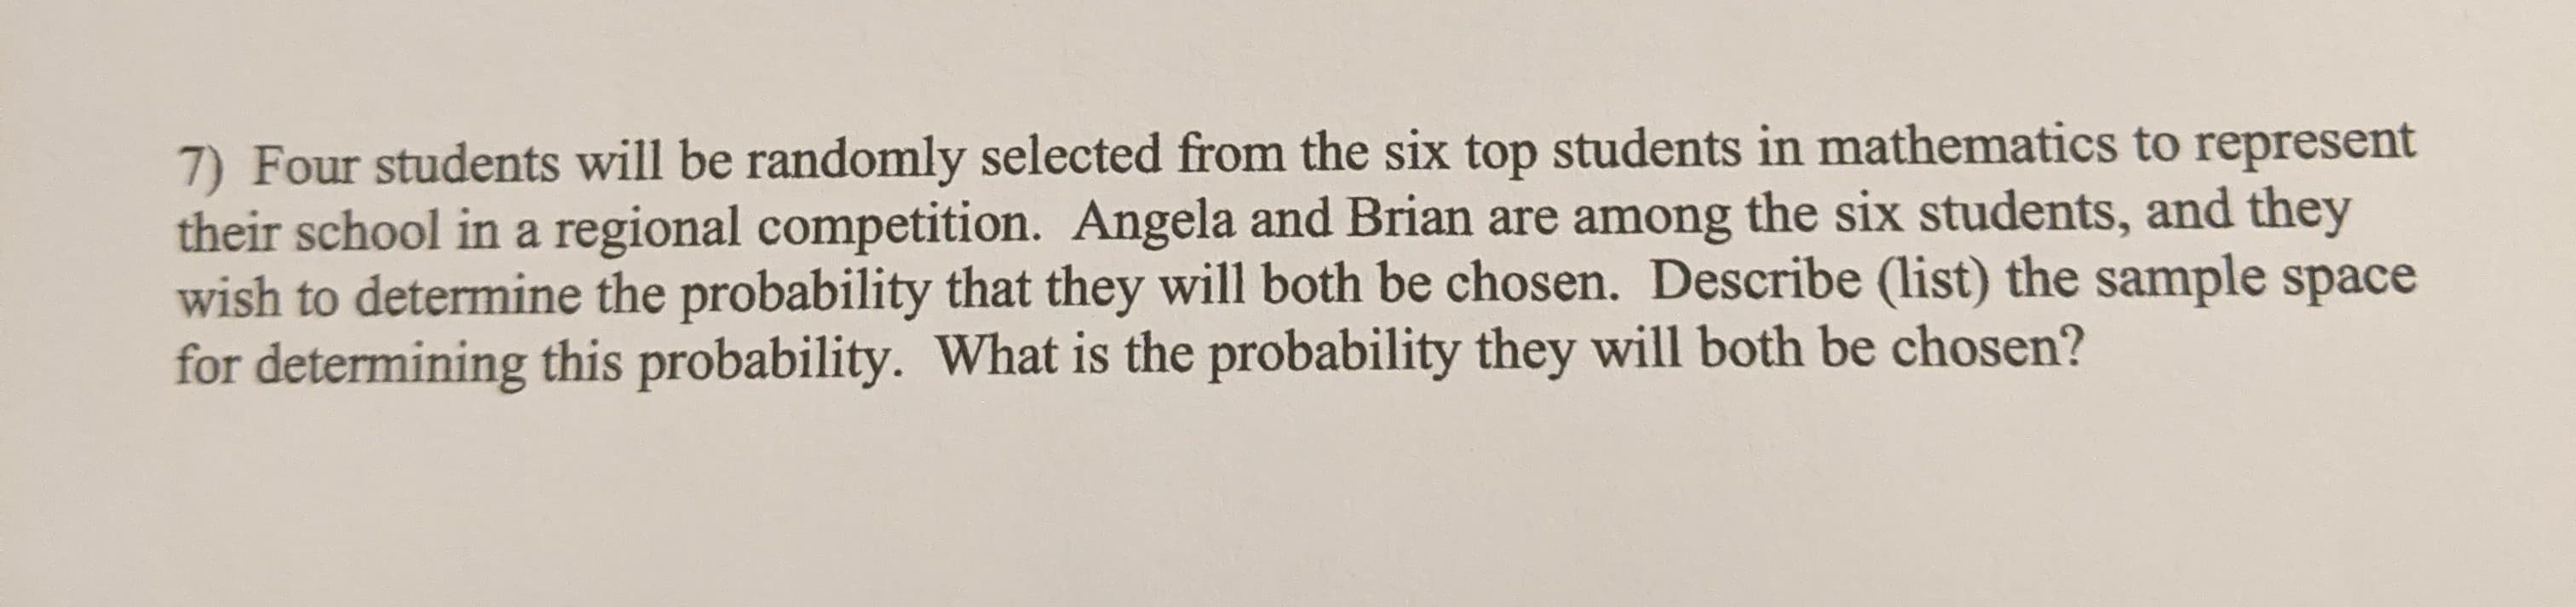 7) Four students will be randomly selected from the six top students in mathematics to represent
their school in a regional competition. Angela and Brian are among the six students, and they
wish to determine the probability that they will both be chosen. Describe (list) the sample space
for determining this probability. What is the probability they will both be chosen?
